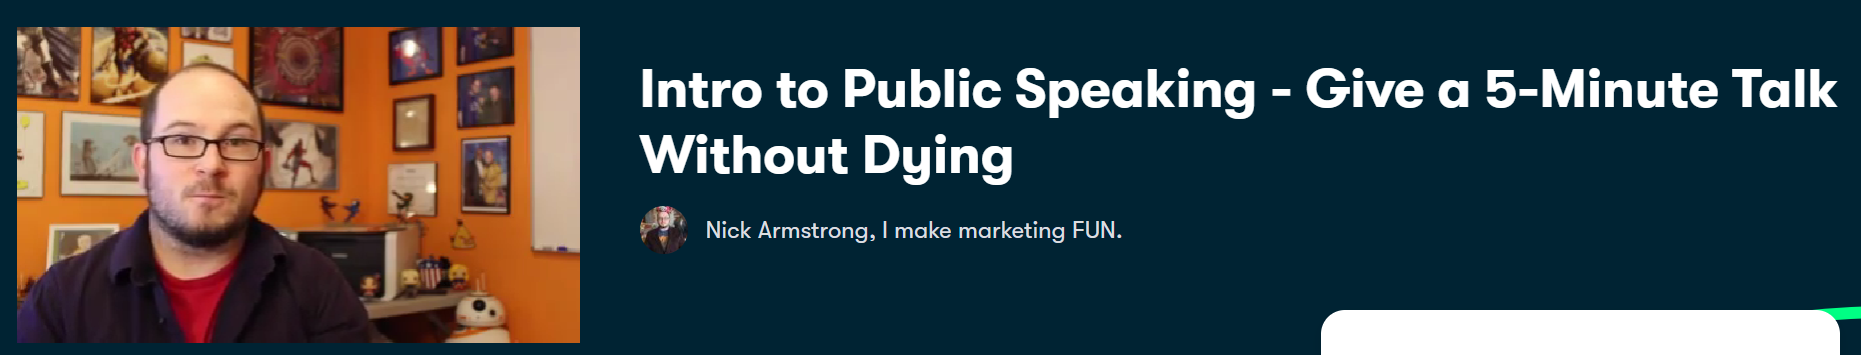 Intro to Public Speaking - Give a 5-Minute Talk Without Dying